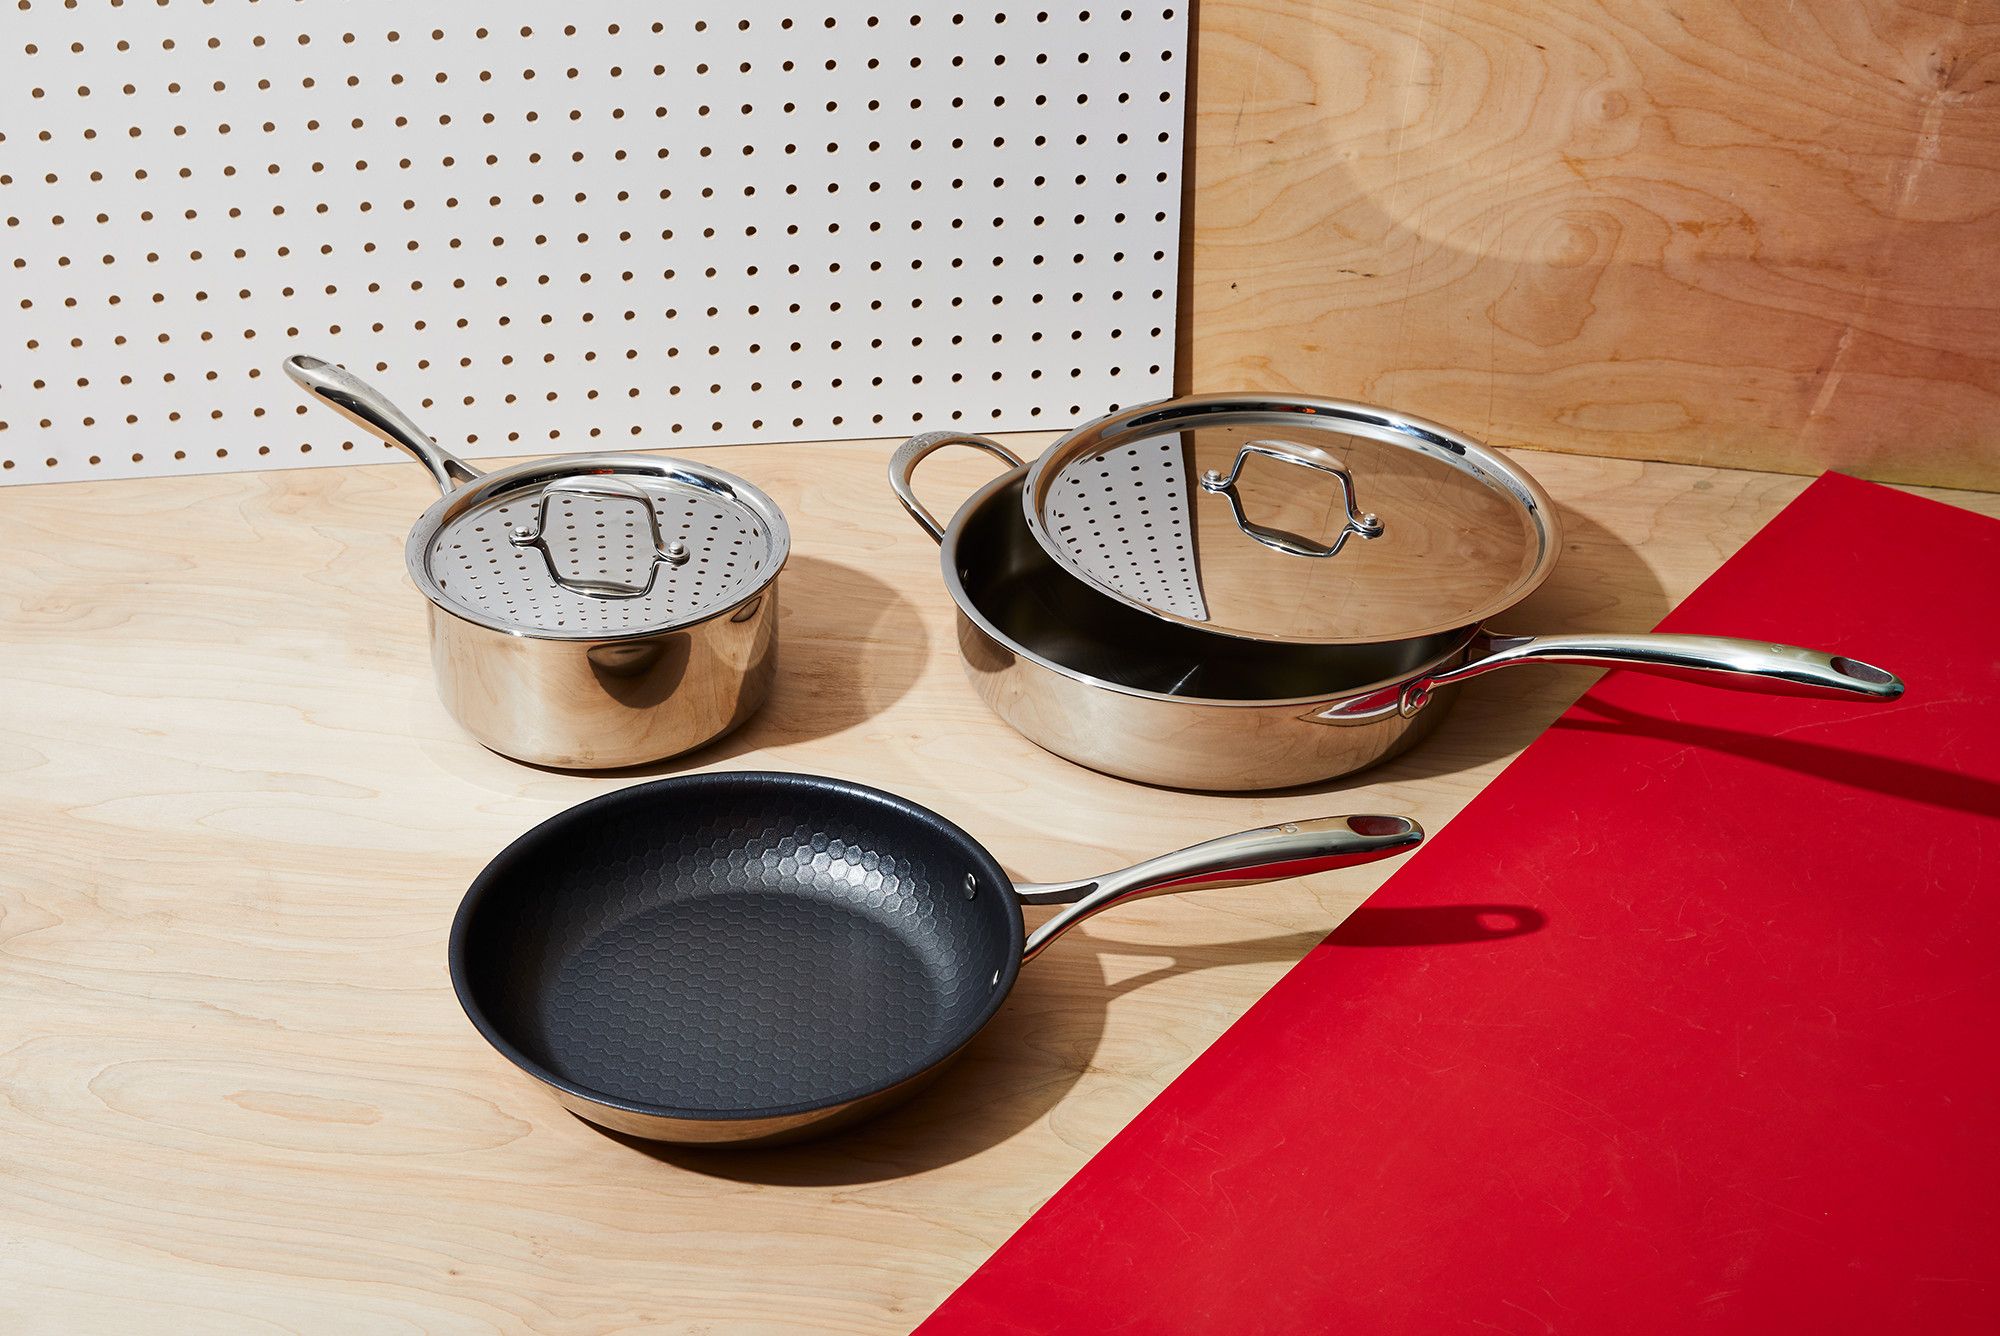 Sardel Cookware Review (Is It Worth Buying?) - Prudent Reviews